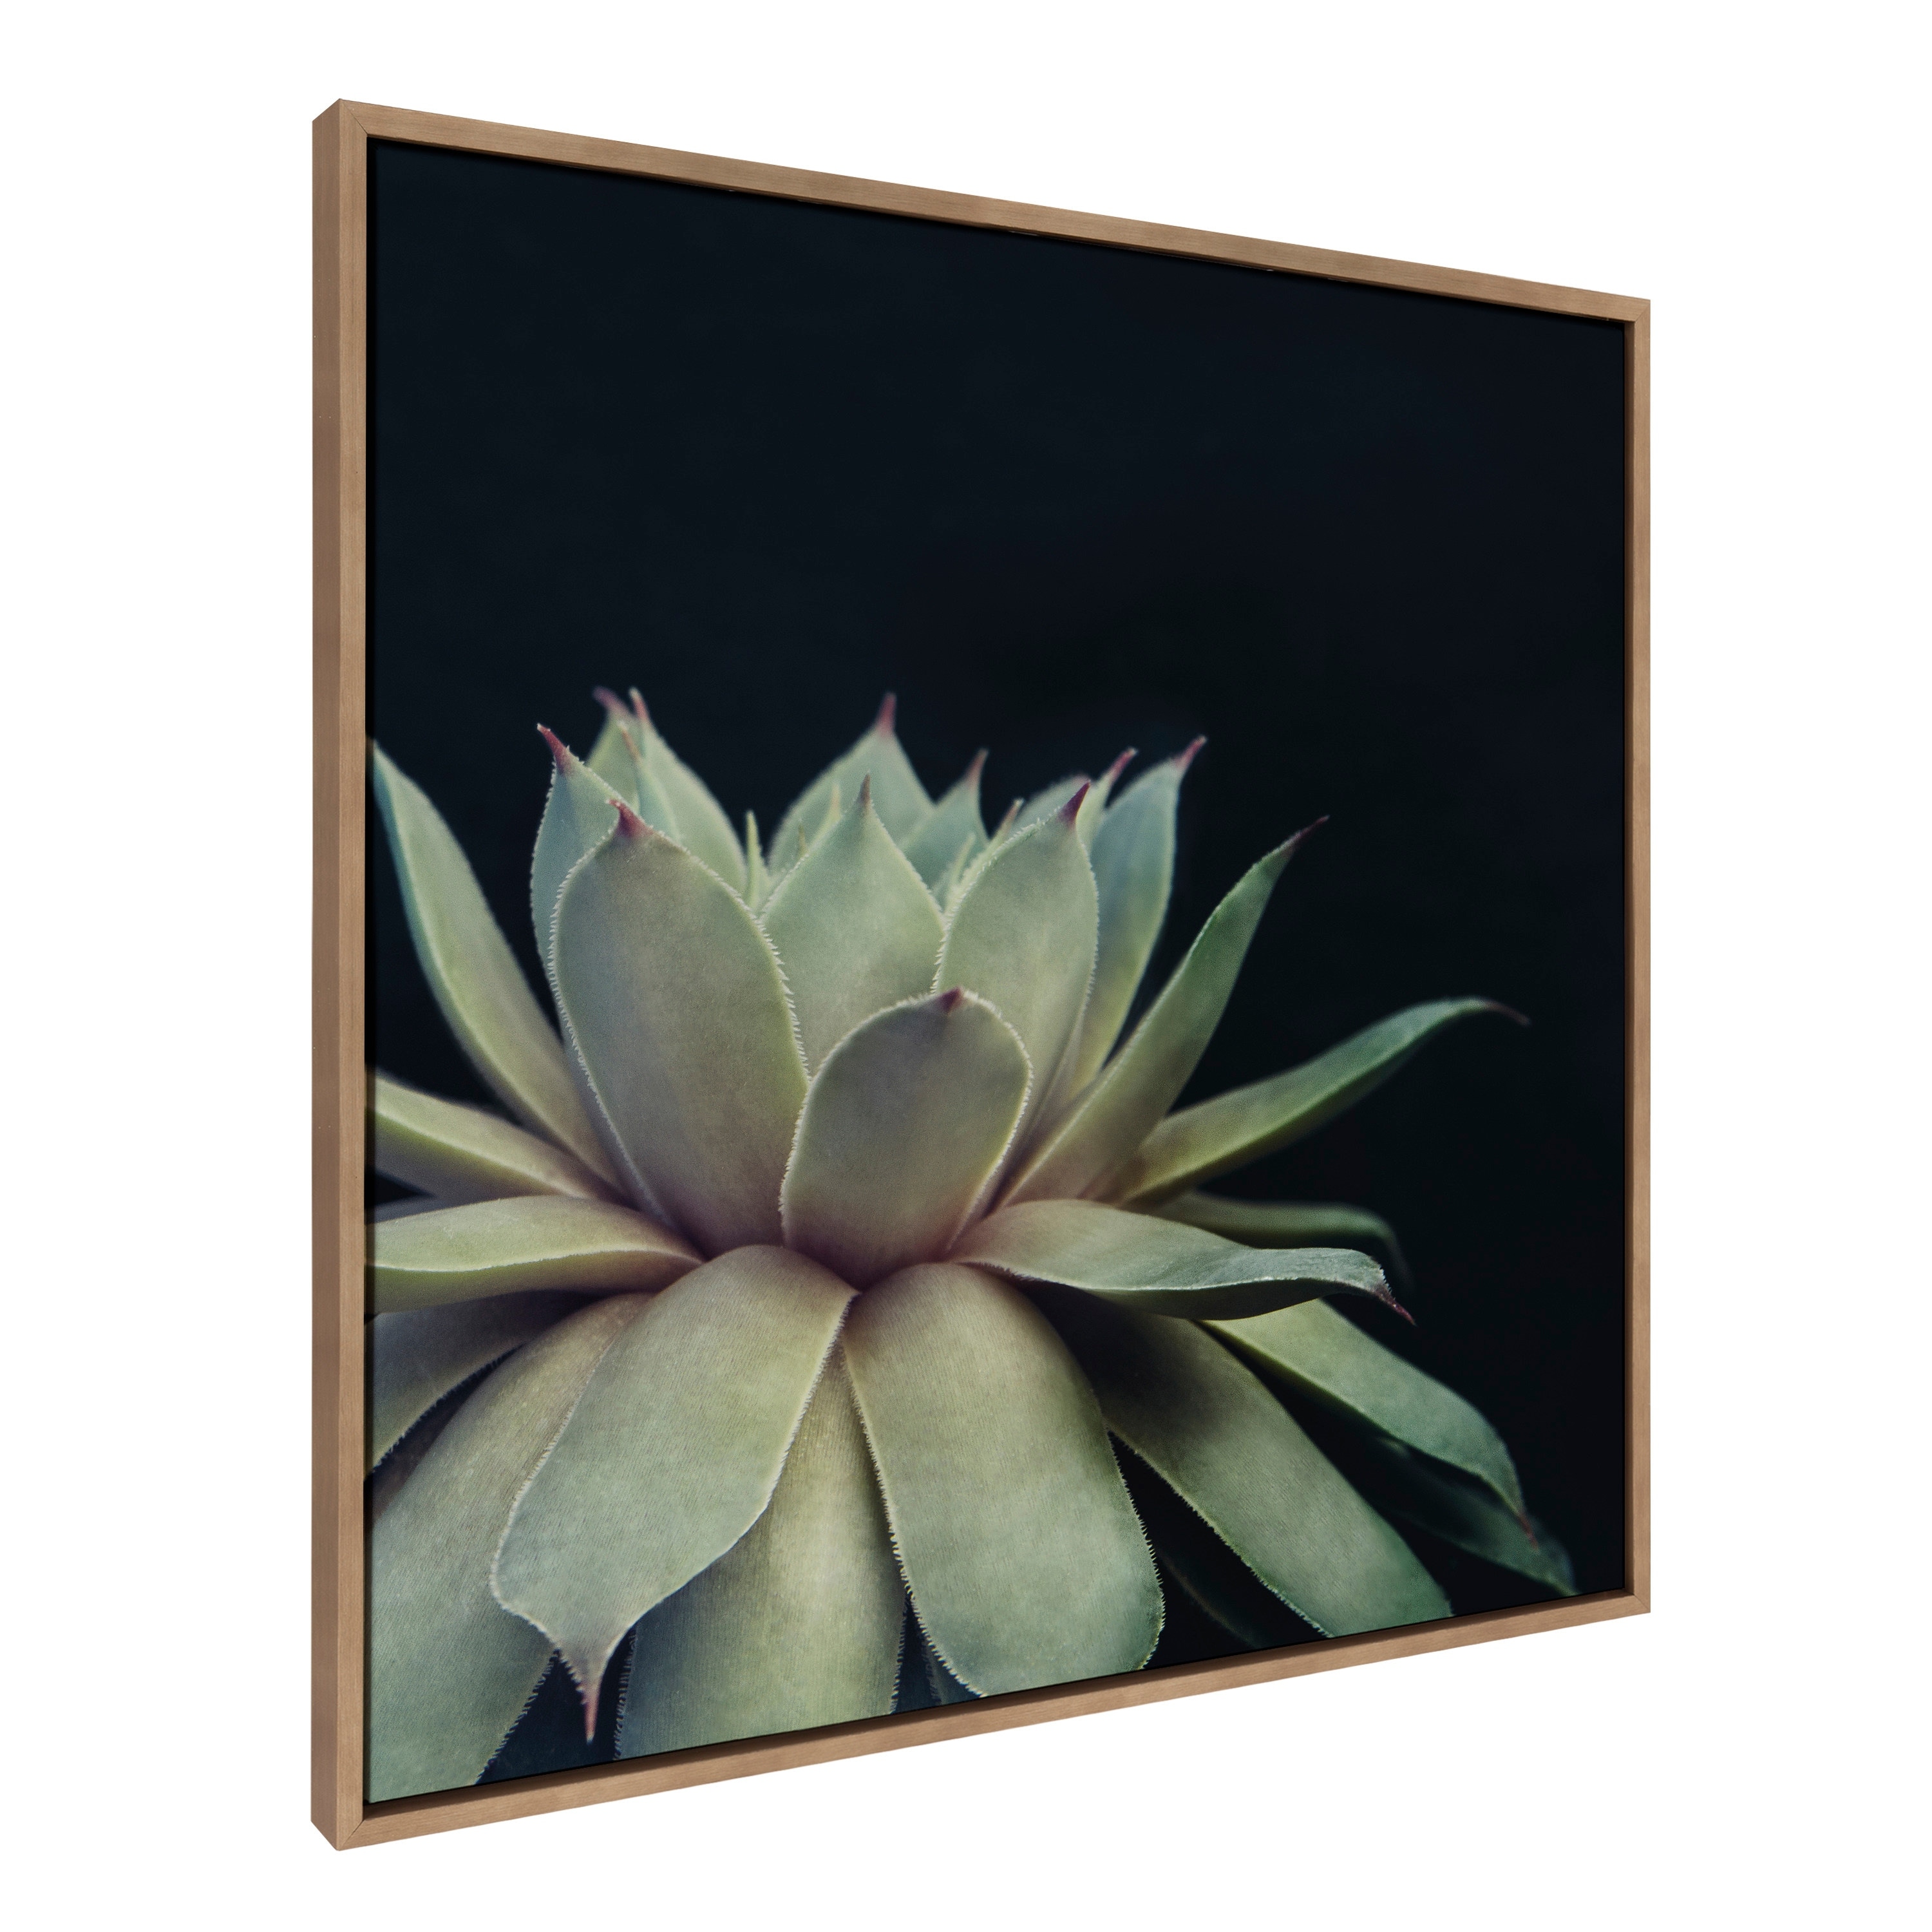 Sylvie Succulent 18x24 Gold Framed Canvas Wall Art by F2 Images Bed Bath   Beyond 17854134